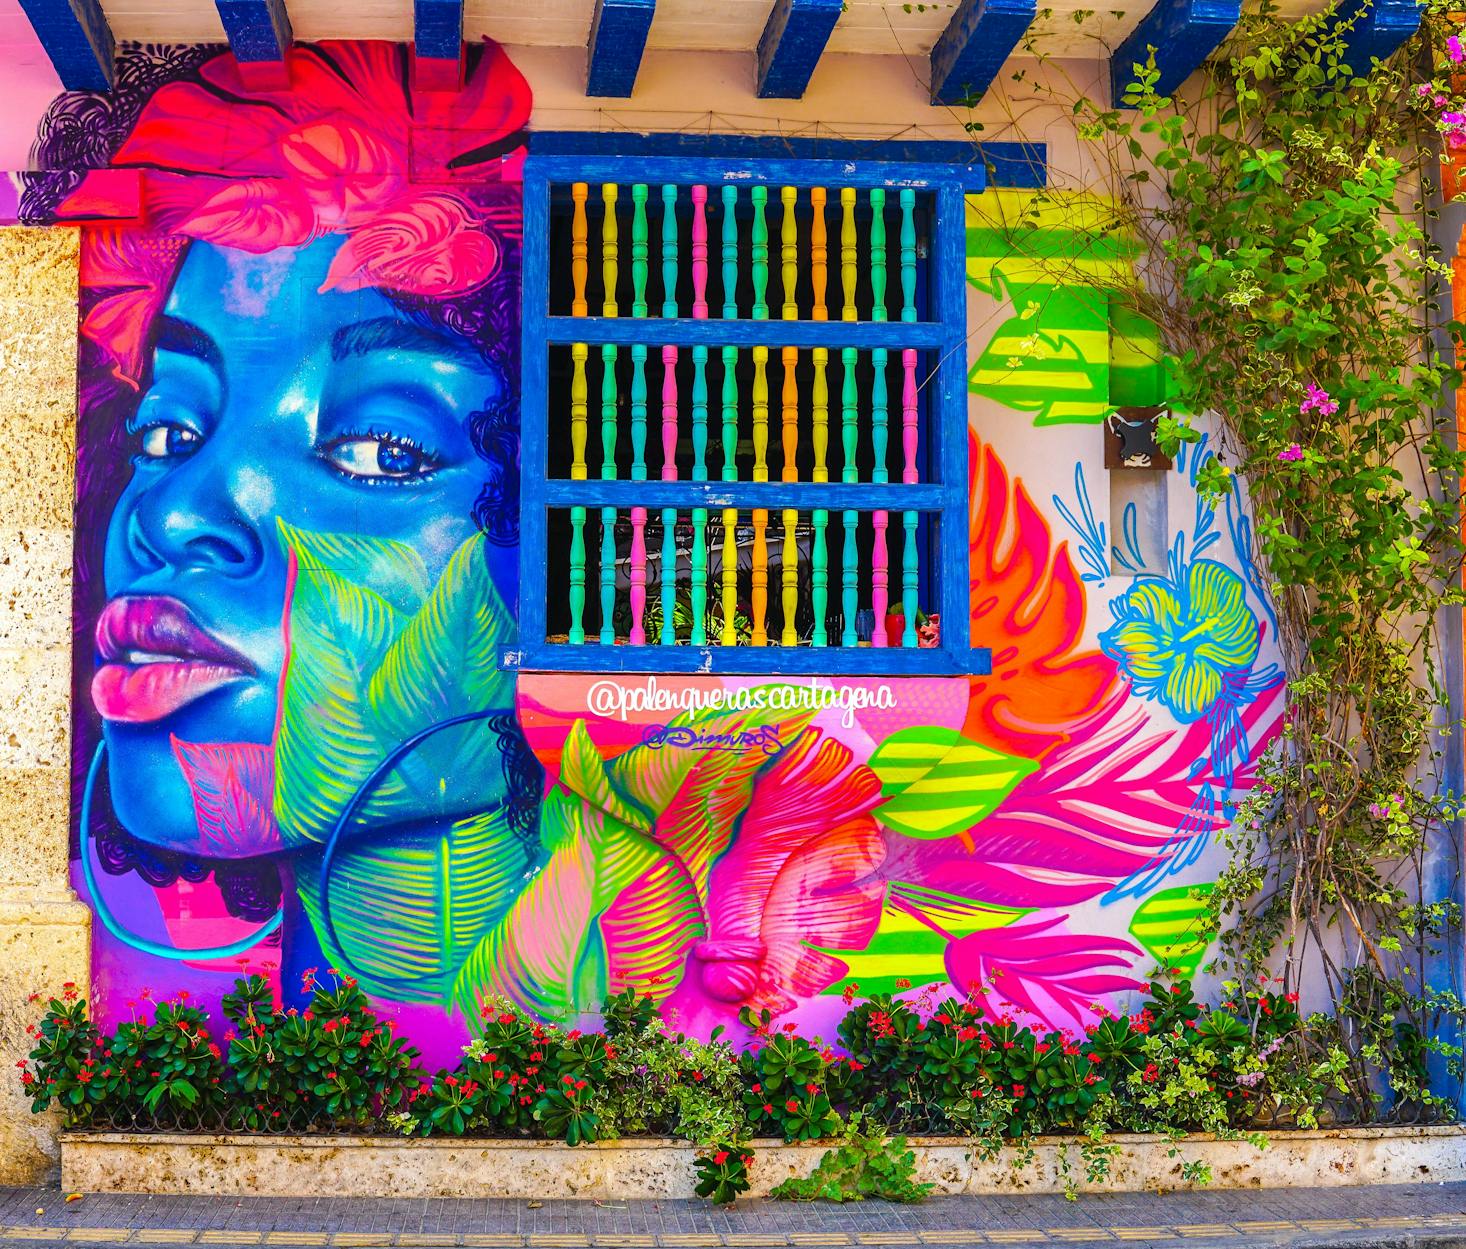 Wall mural in Cartagena, Colombia